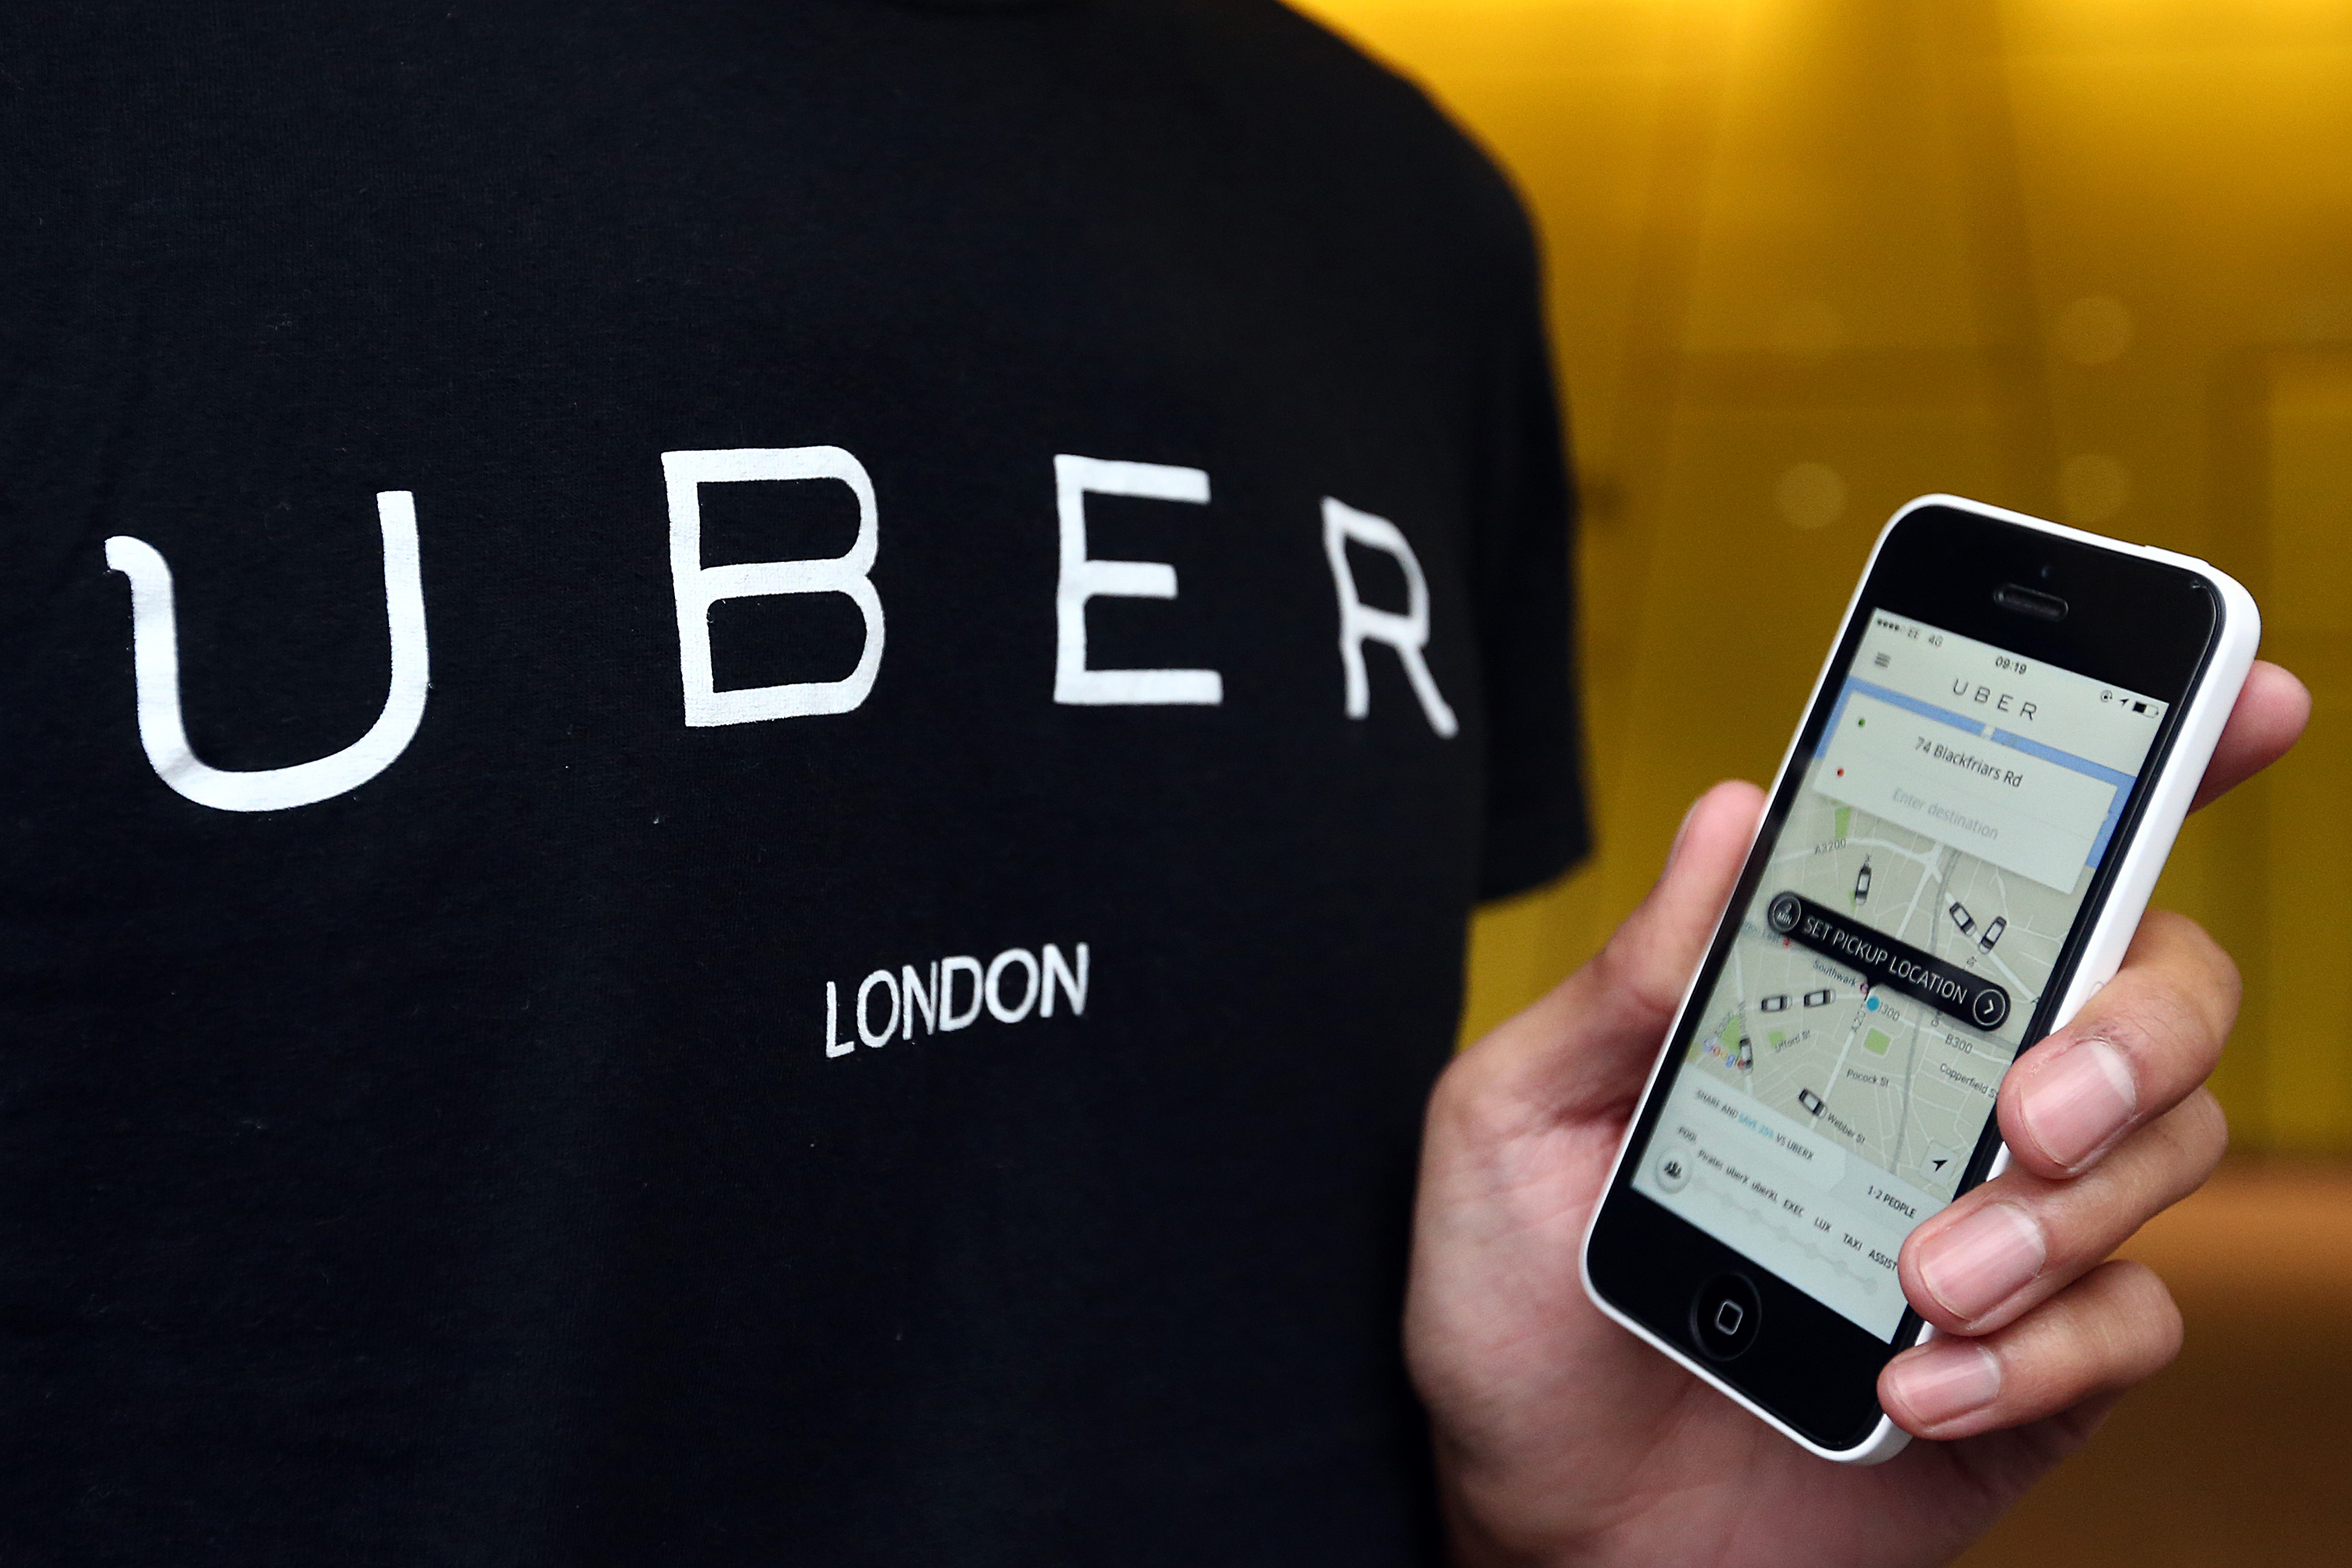 An Uber driver poses for a photograph in an Uber t-shirt and holding a smart phone displaying the Uber app after delivering petitions to the Transport for London headquarters on December 22, 2015 in London, England. (Carl Court&mdash;Getty Images)